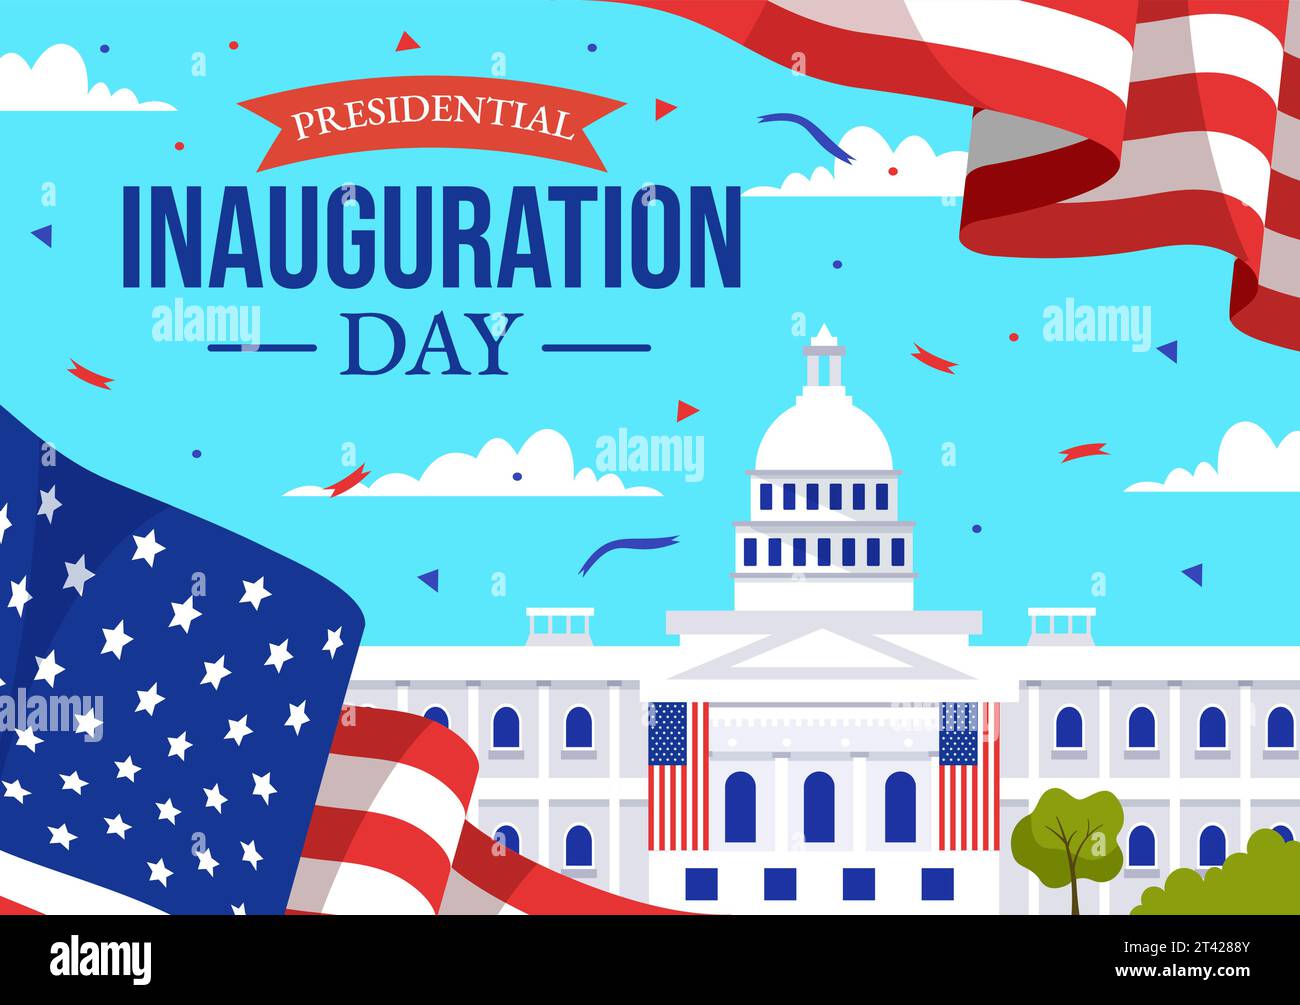 USA Presidential Inauguration Day Vector Illustration January 20 with Capitol Building Washington D.C. and American Flag in Background Design Stock Vector